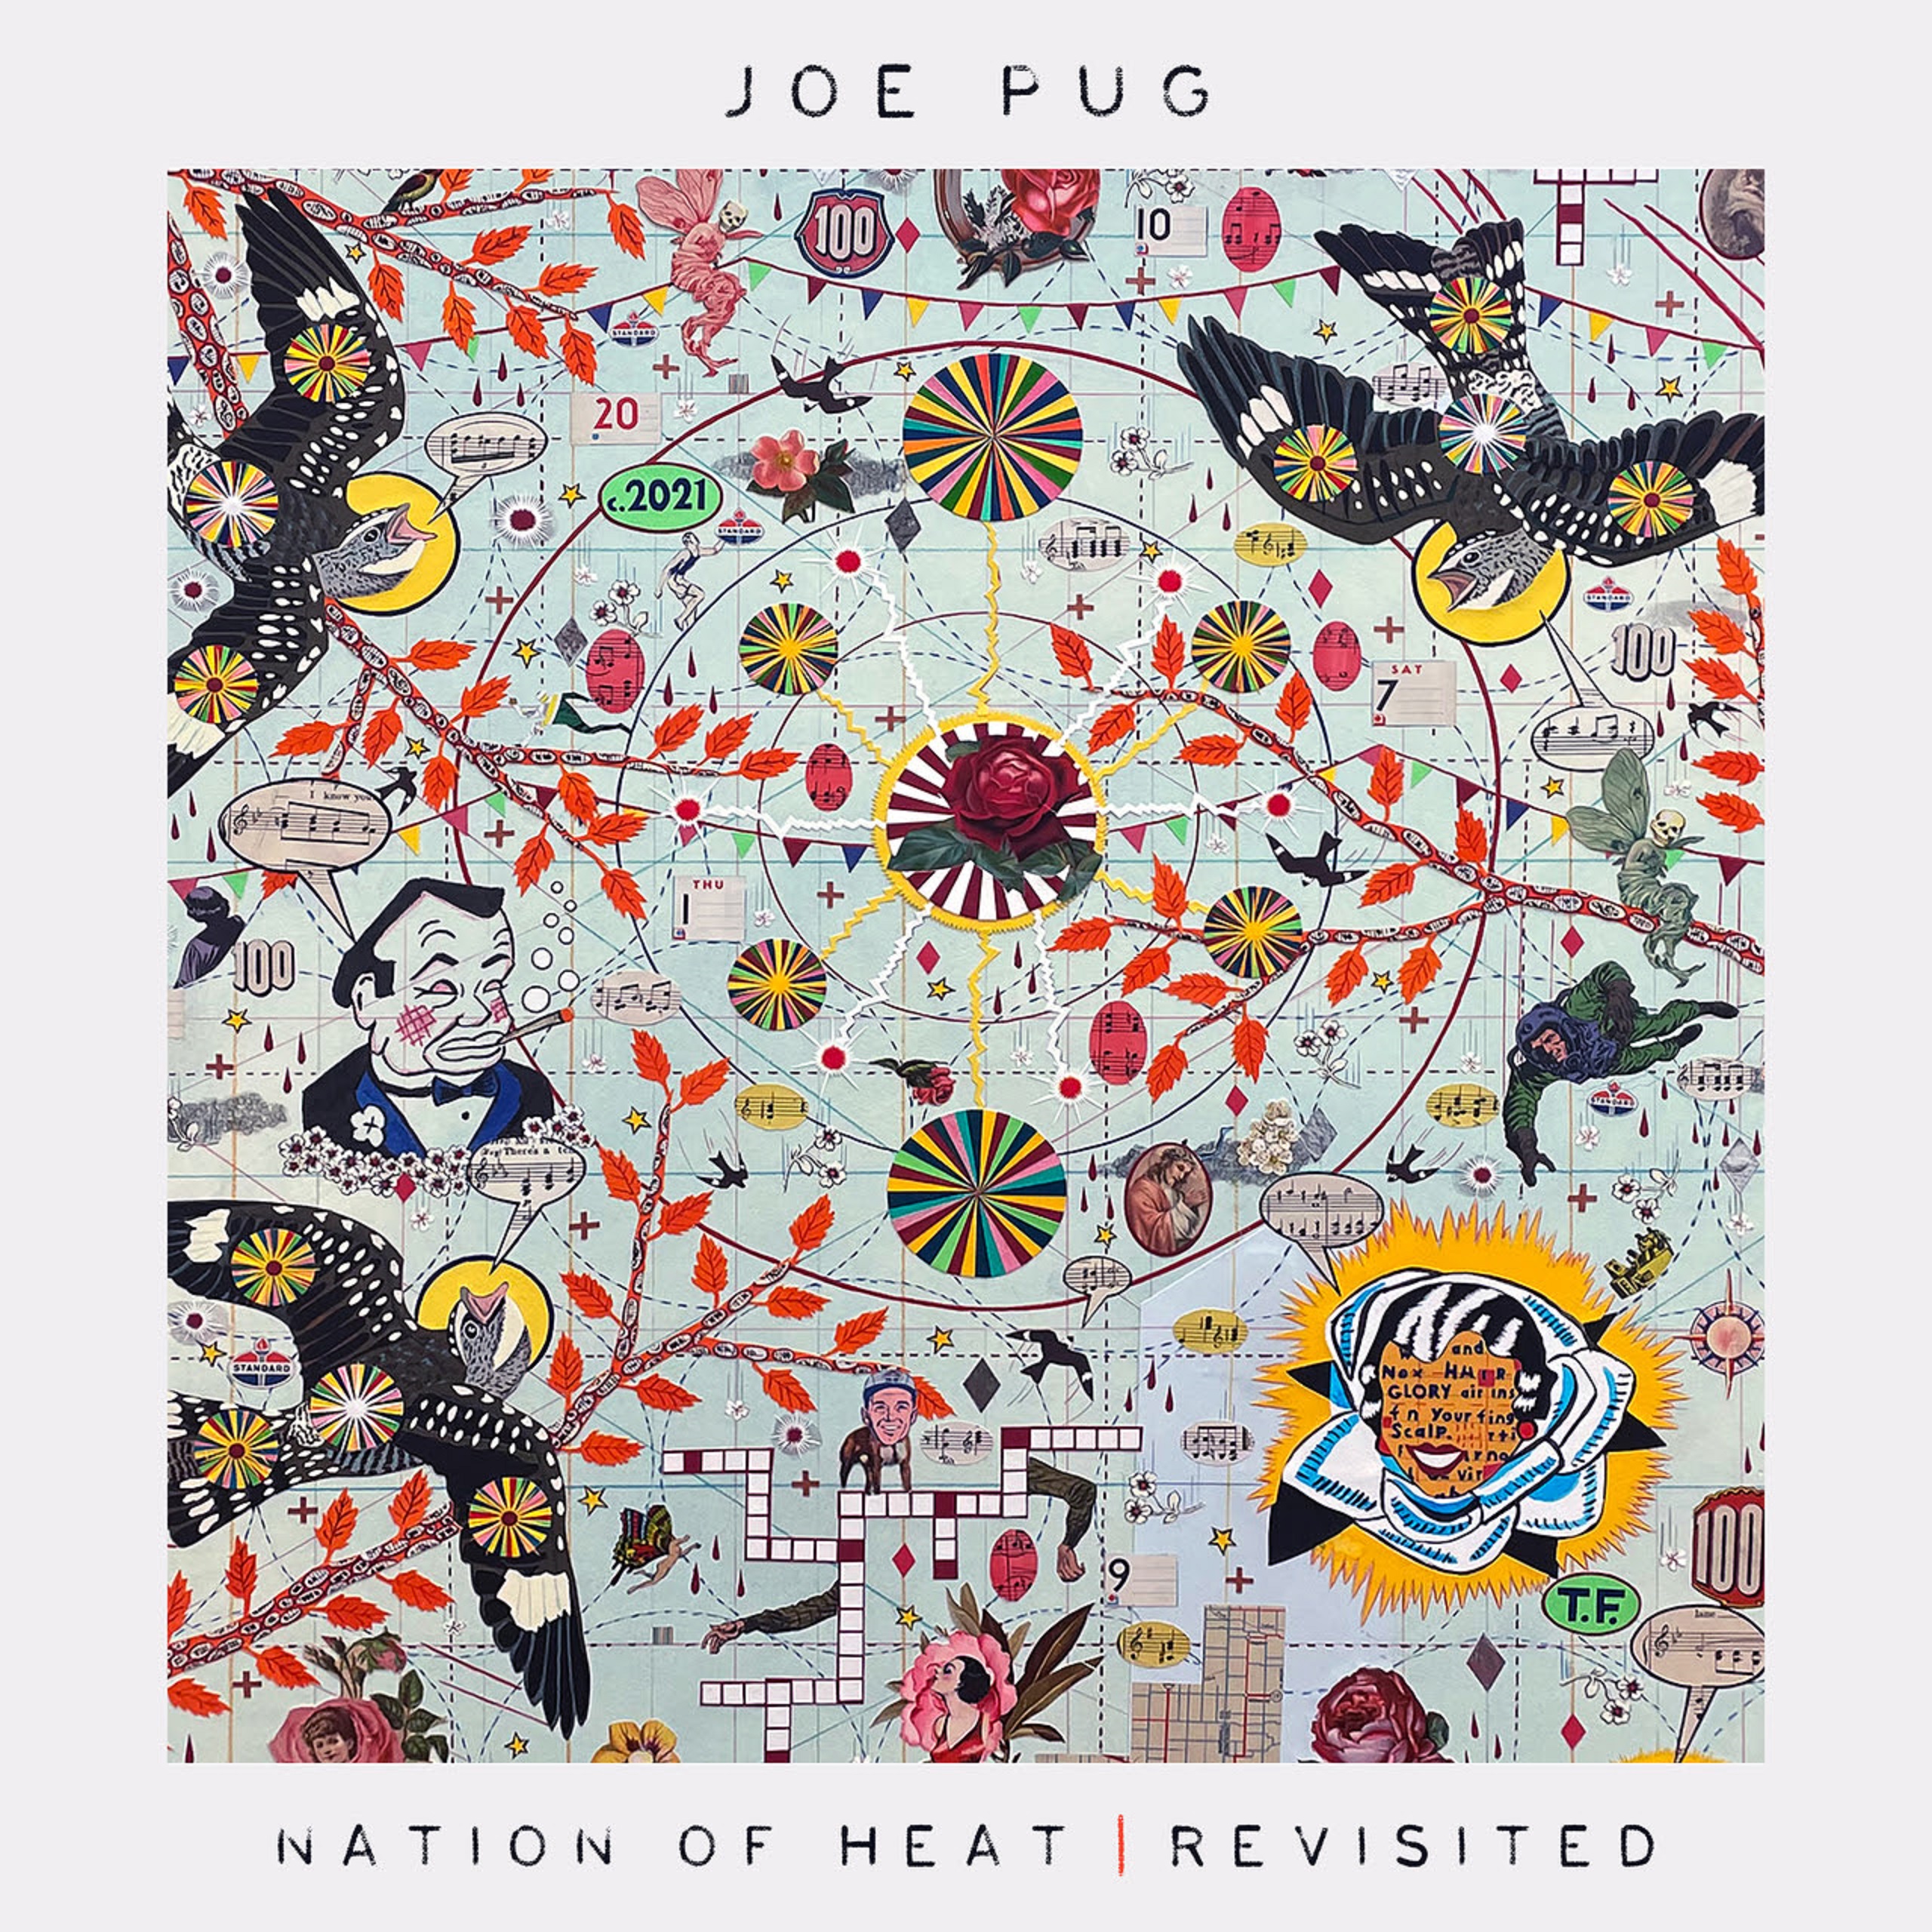 Joe Pug Releases New Single Off Upcoming LP Feat. Brandon Flowers (The Killers), Members of My Morning Jacket, The 400 Unit And More